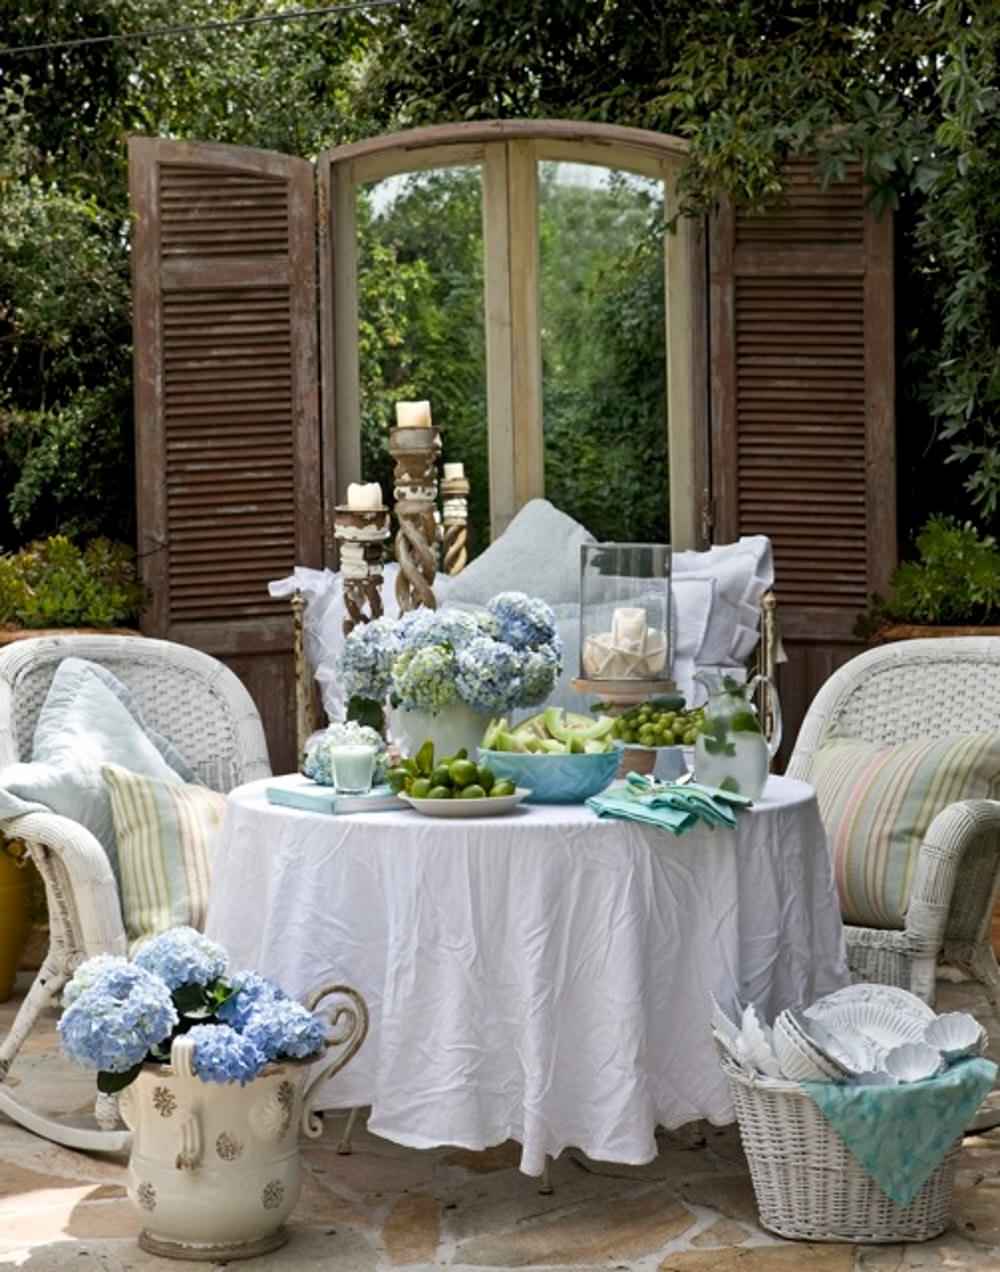 1-67 Rustic Charm Outdoors: Shabby Chic Patio Ideas